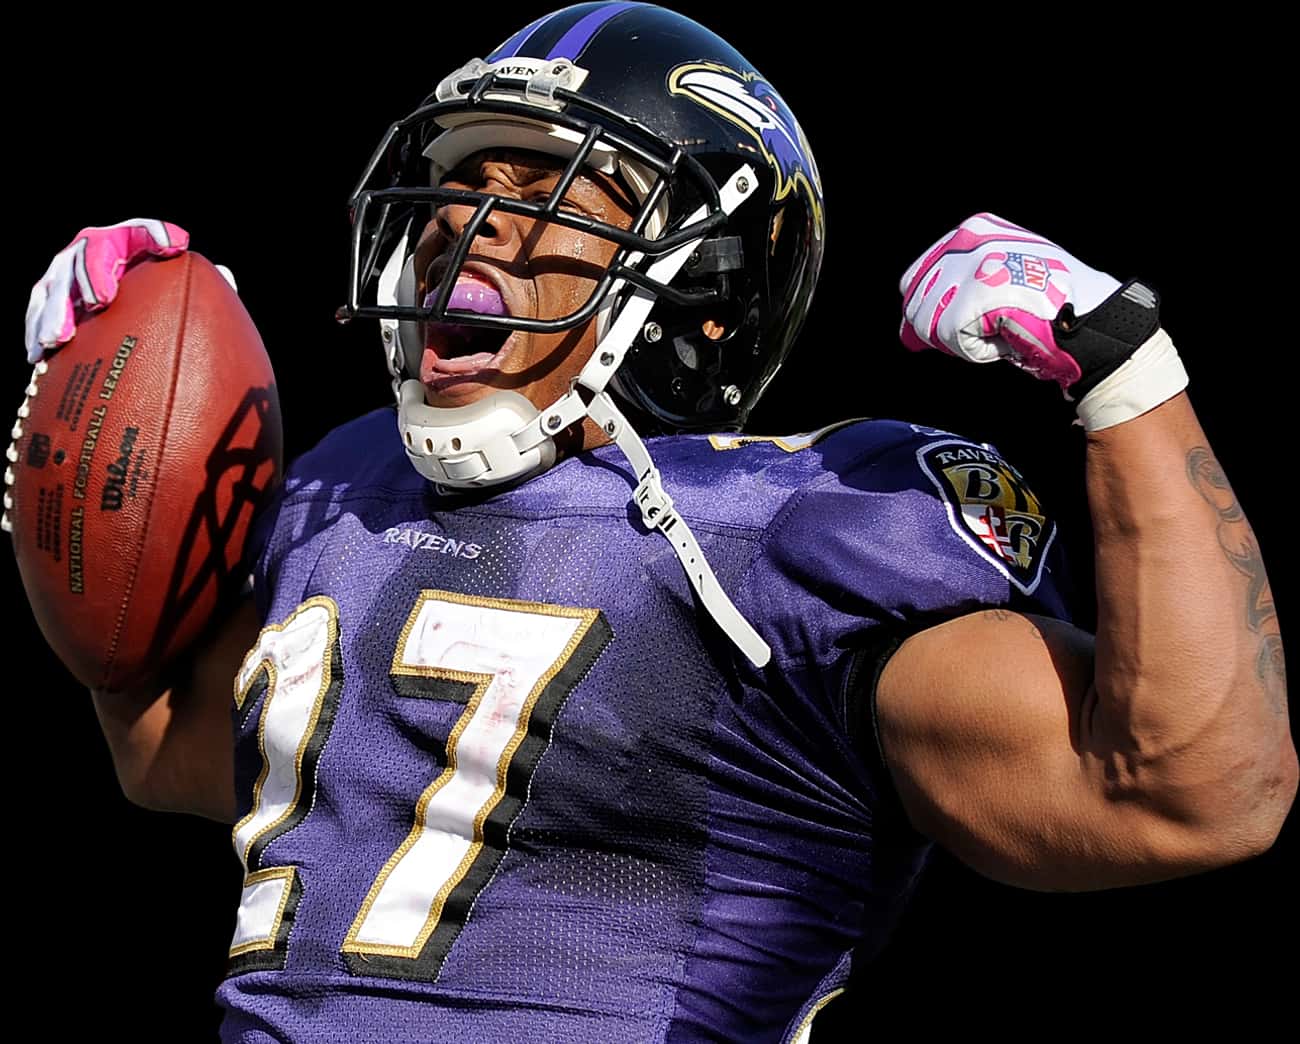 That Time Ray Rice Admitted to Cheating the Justice System